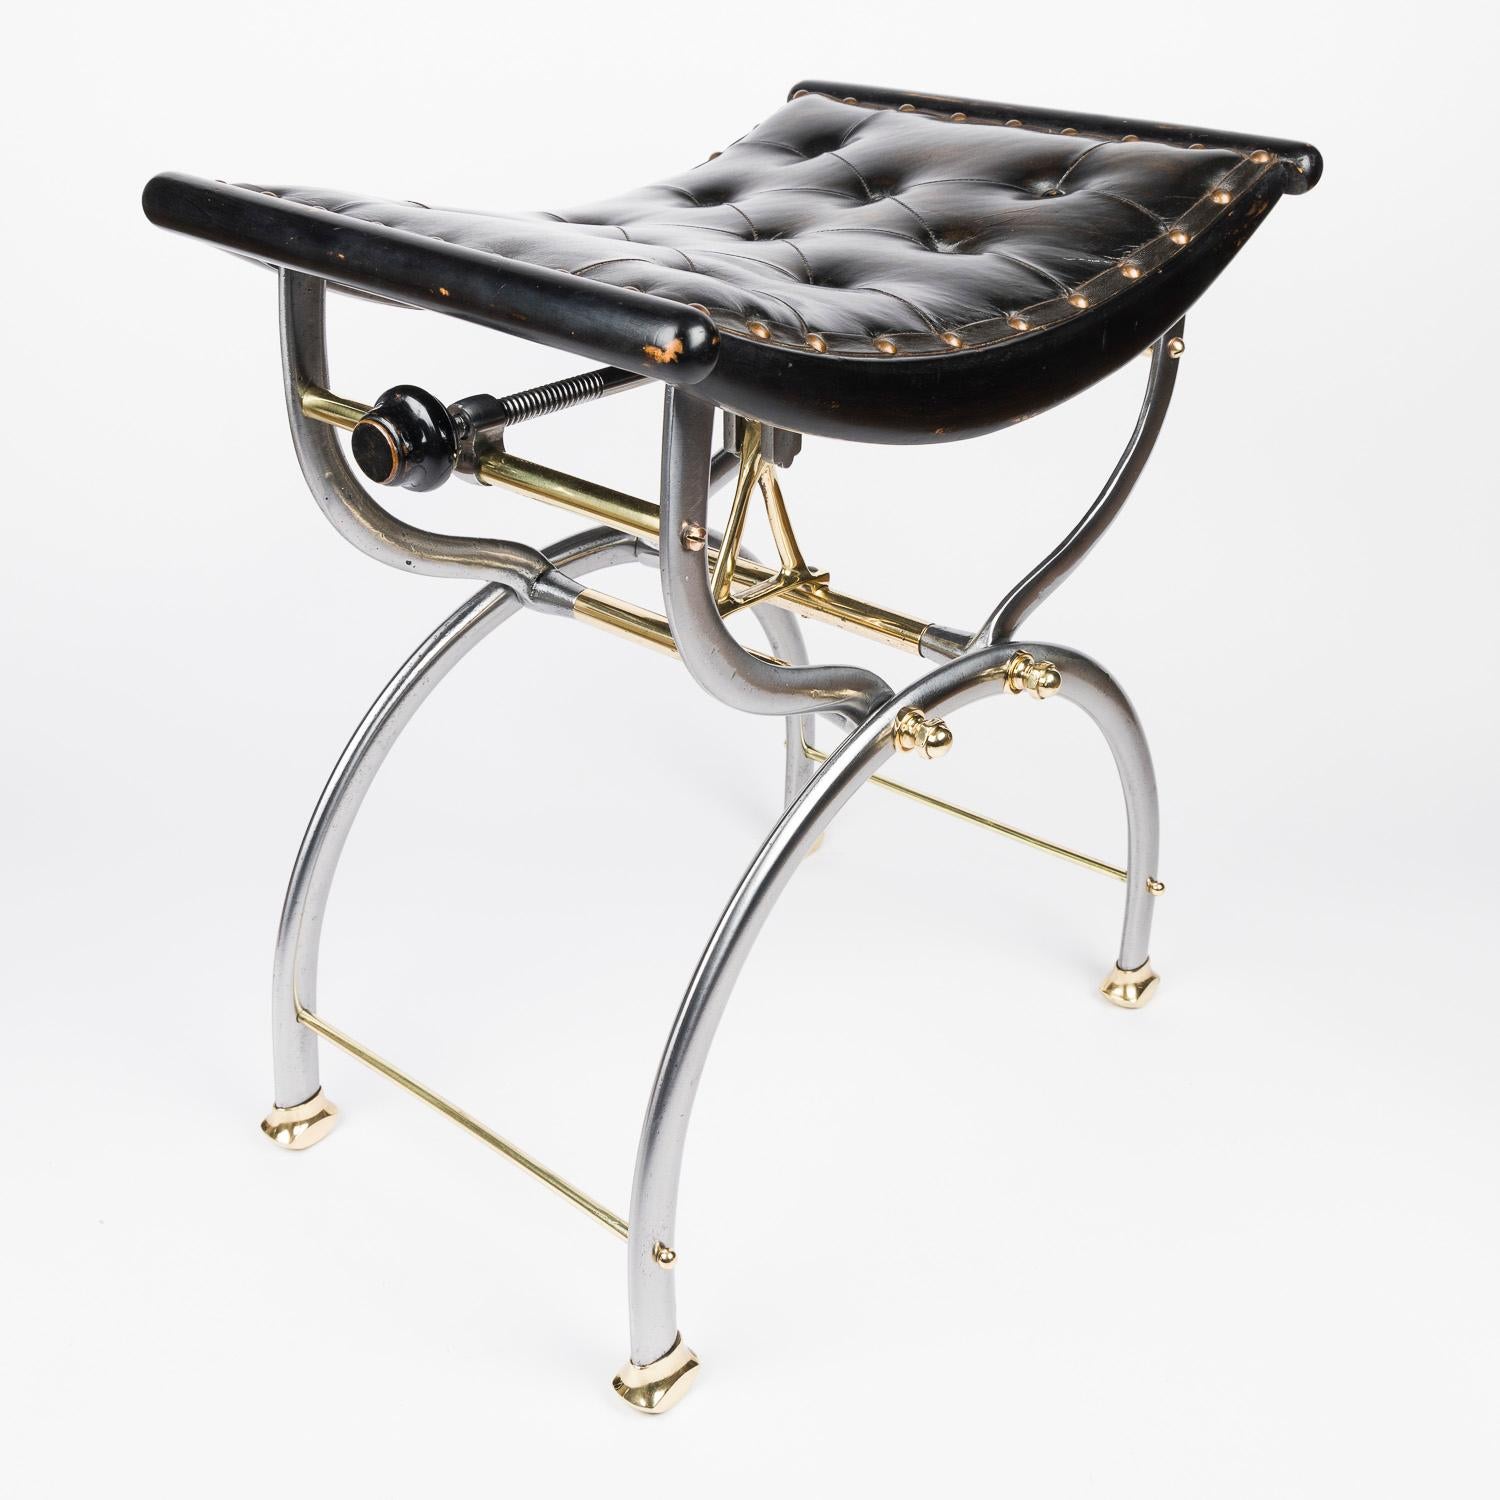 A steel and brass Victorian patent stool of adjustable height by C. H. Hare and Sons of Birmingham. 

Seat height adjusts by turning the handles underneath the sides of the seat. 

Frame marked: C.H. Hare & Sons Patent App'd for No. 18969.

Seat